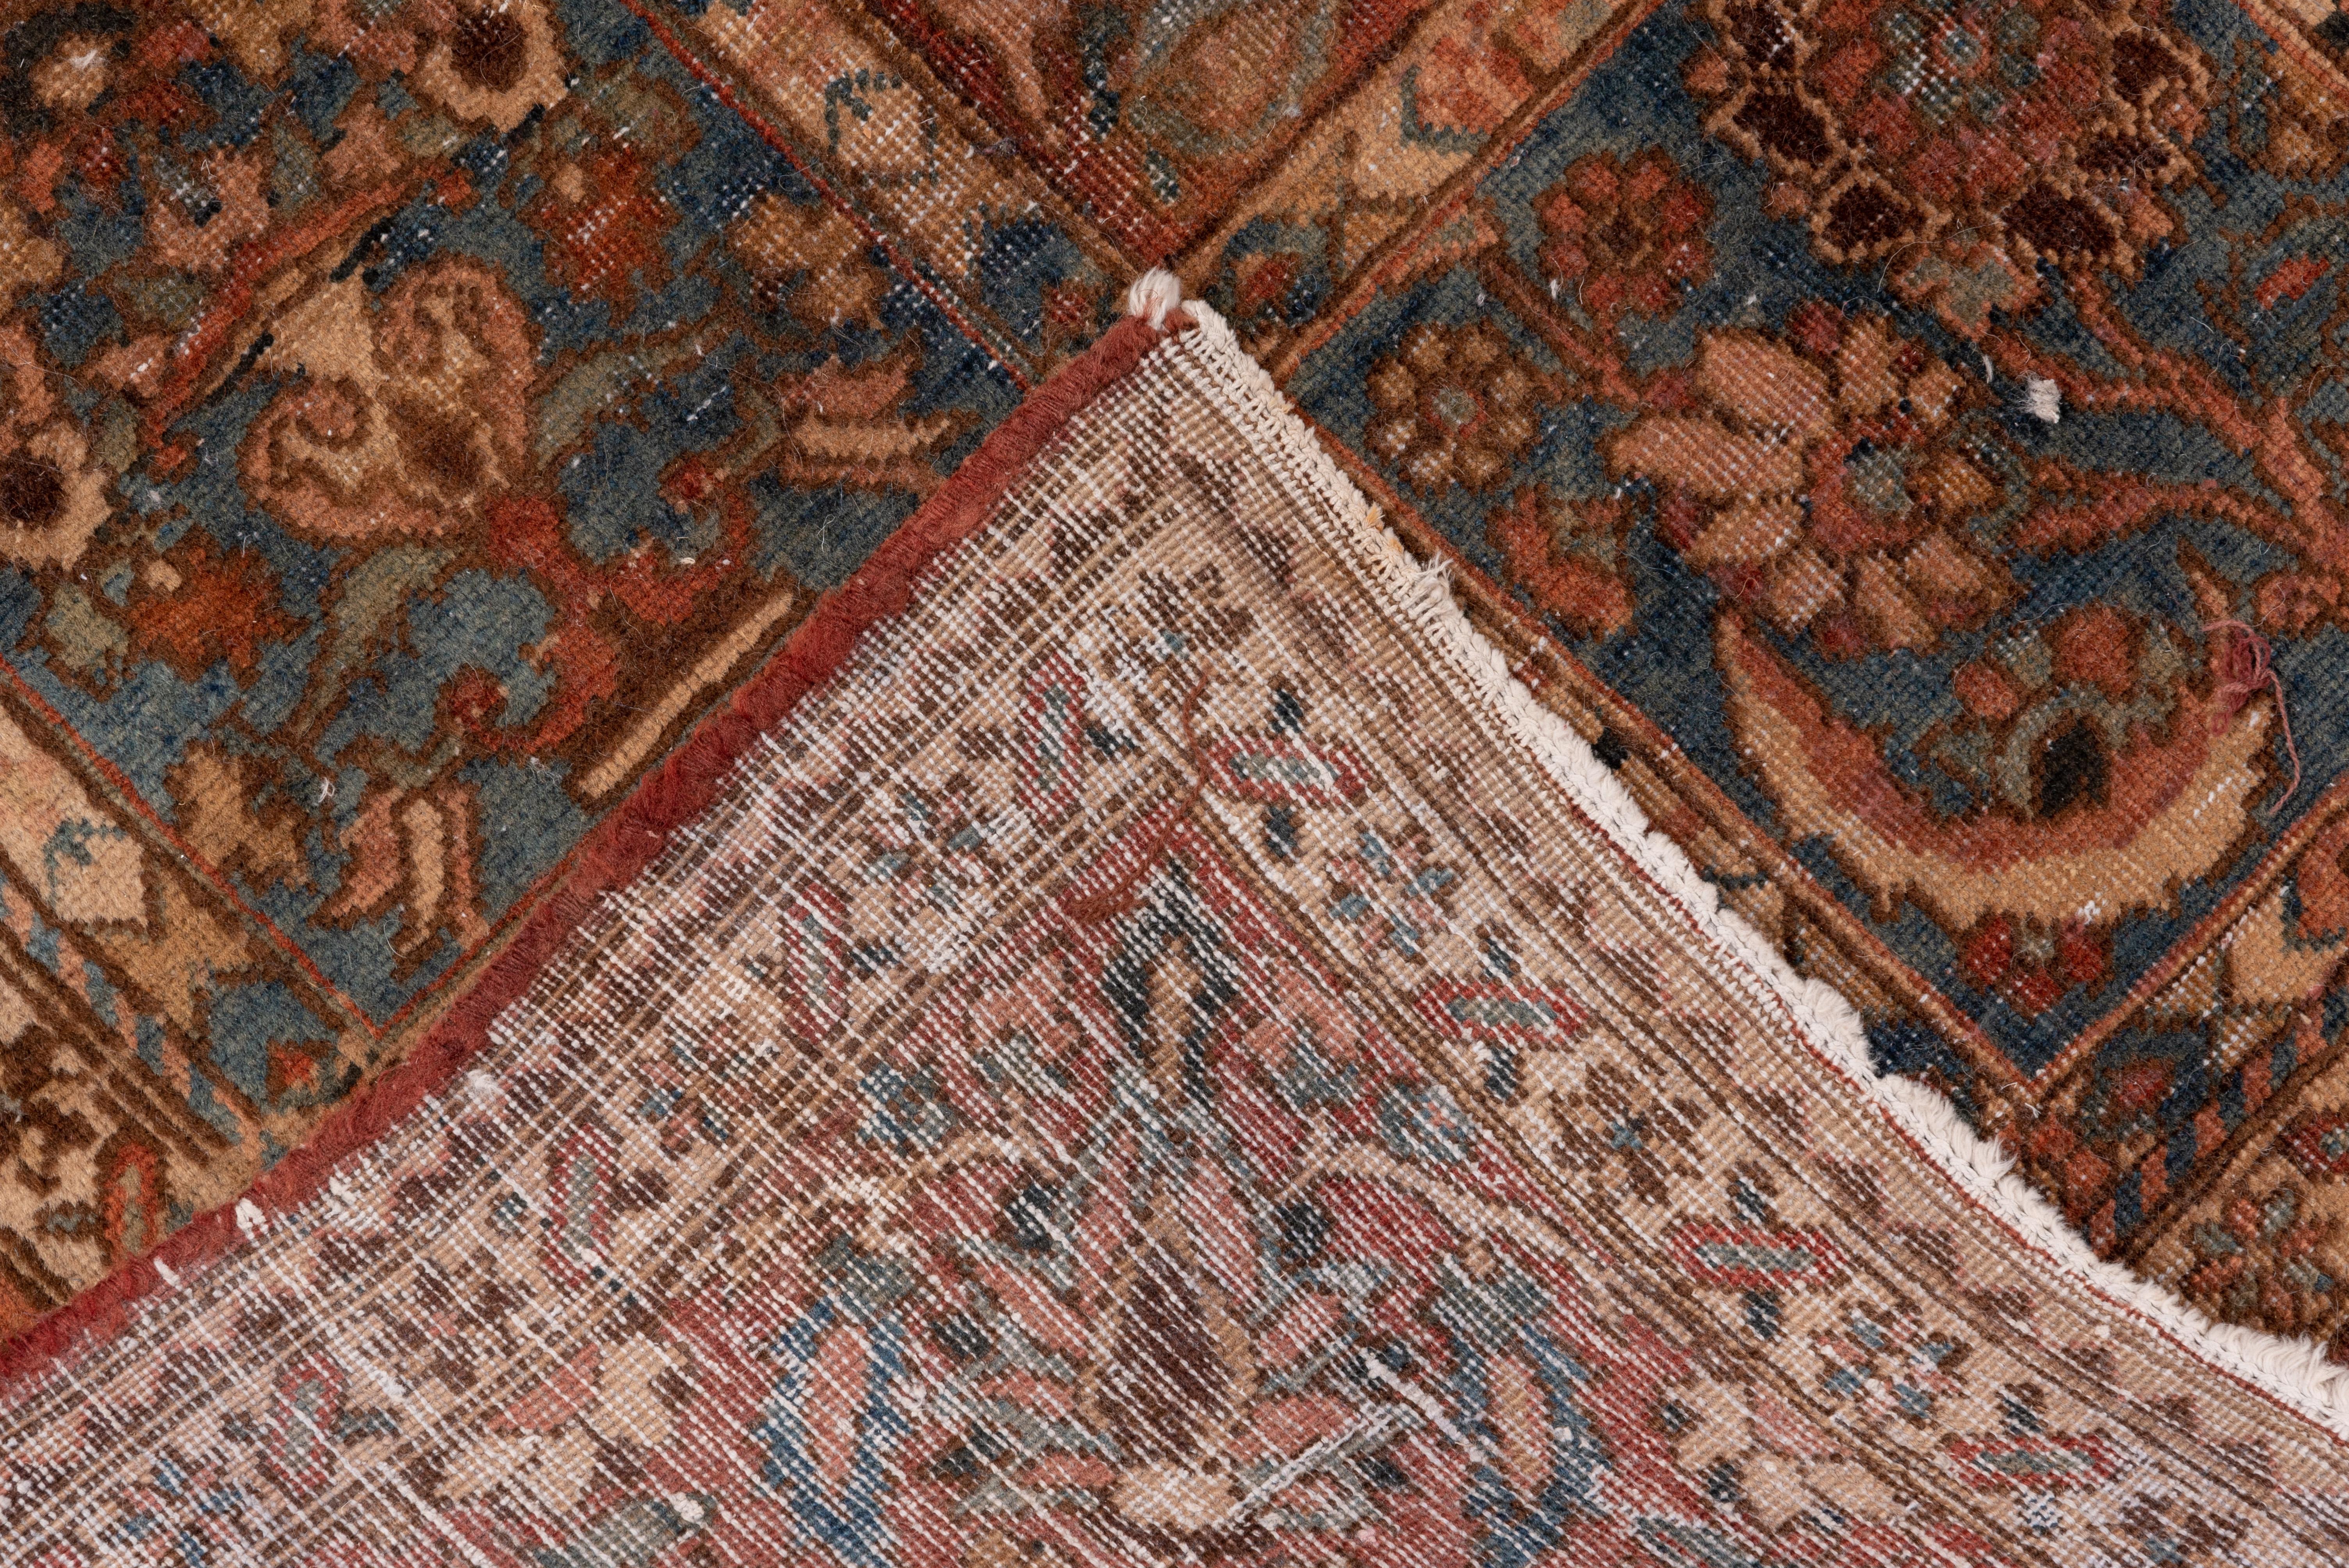 Tribal Eliko Rugs by David Ariel Antique Persian Bakhtiari Rug with Warm TOnes For Sale